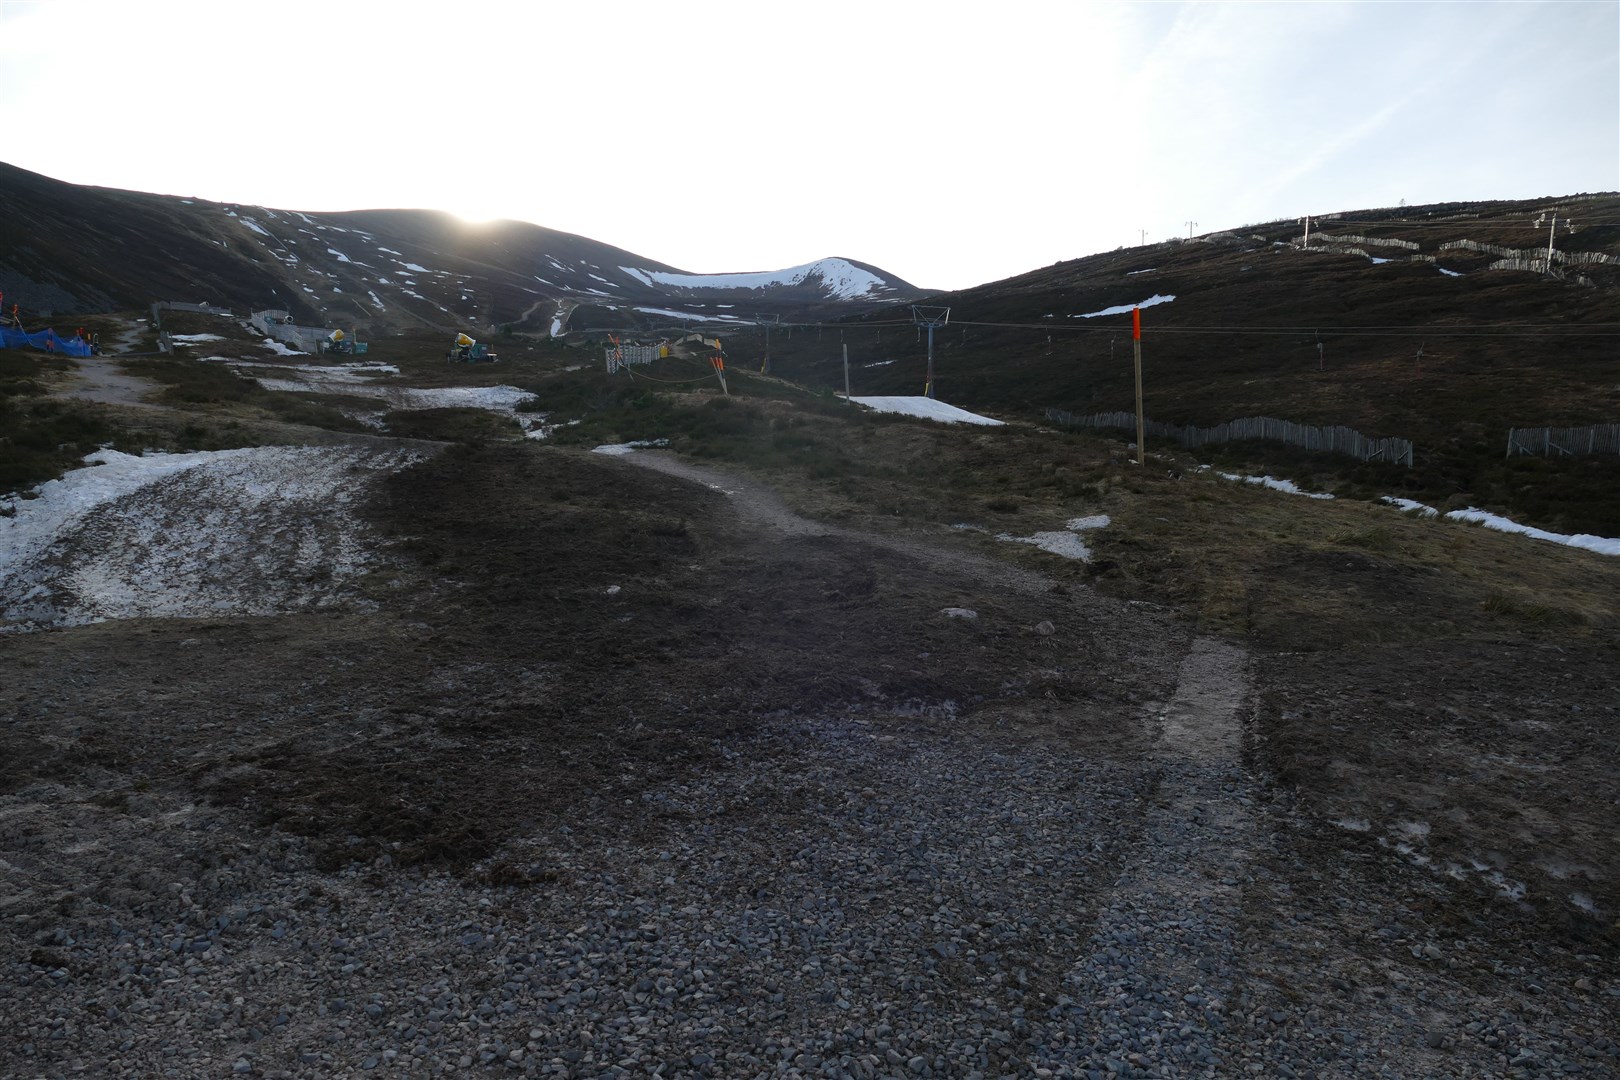 The search was conducted on the Cairngorms plateau above the ski area.